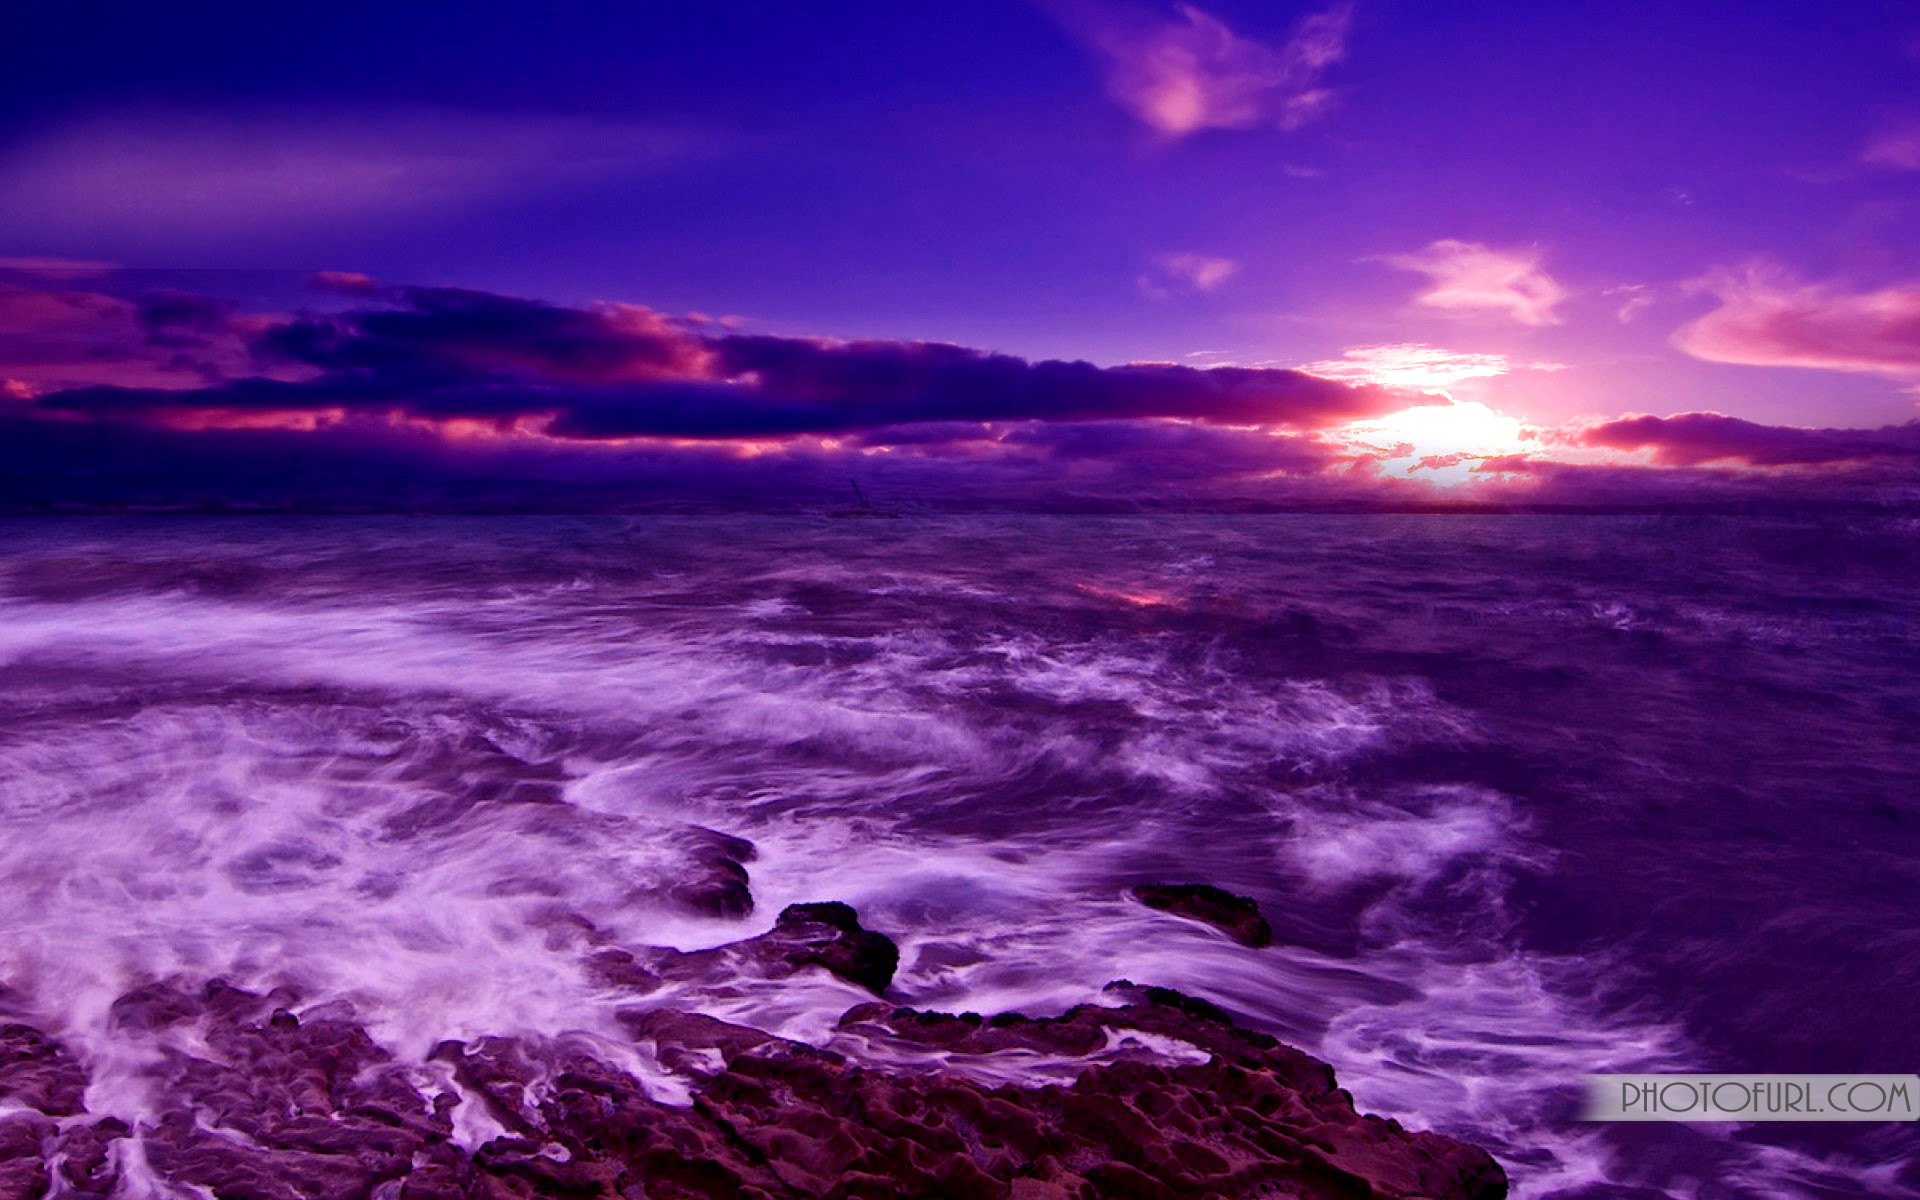 A purple sky with clouds over the ocean - 3D